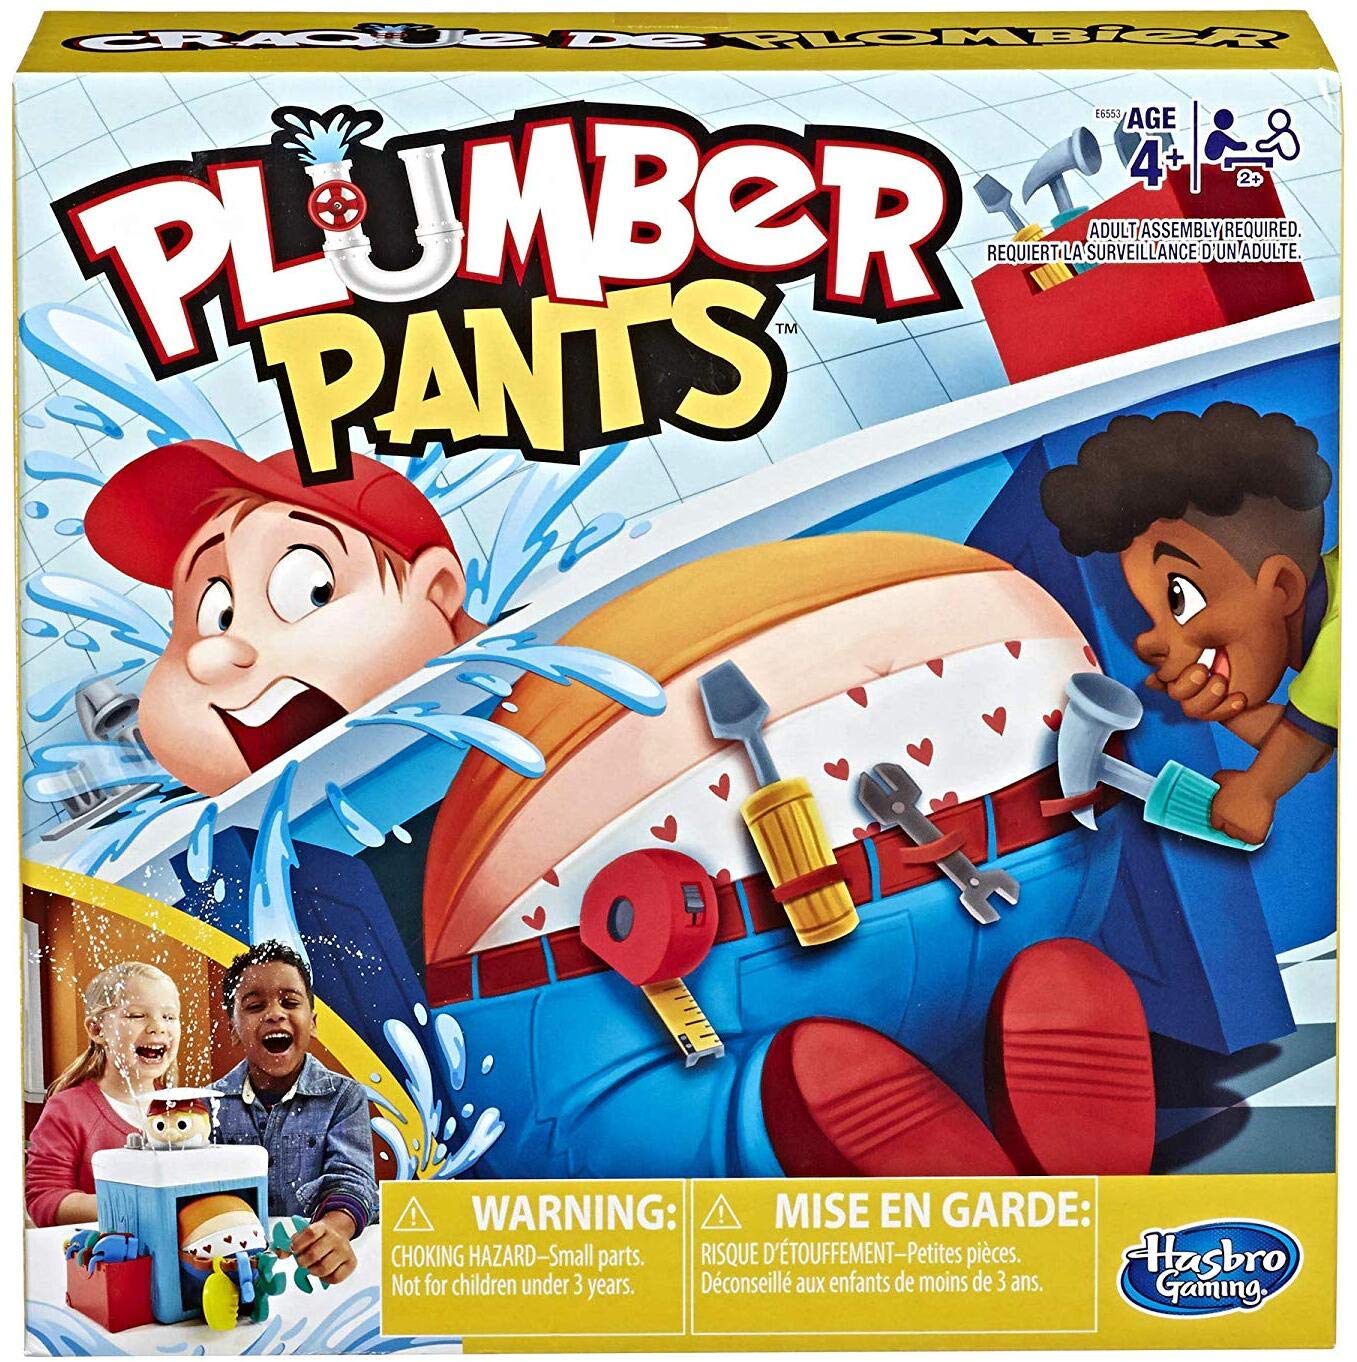 Hasbro Gaming Plumber PANTS Game for Kids Ages 4 & Up